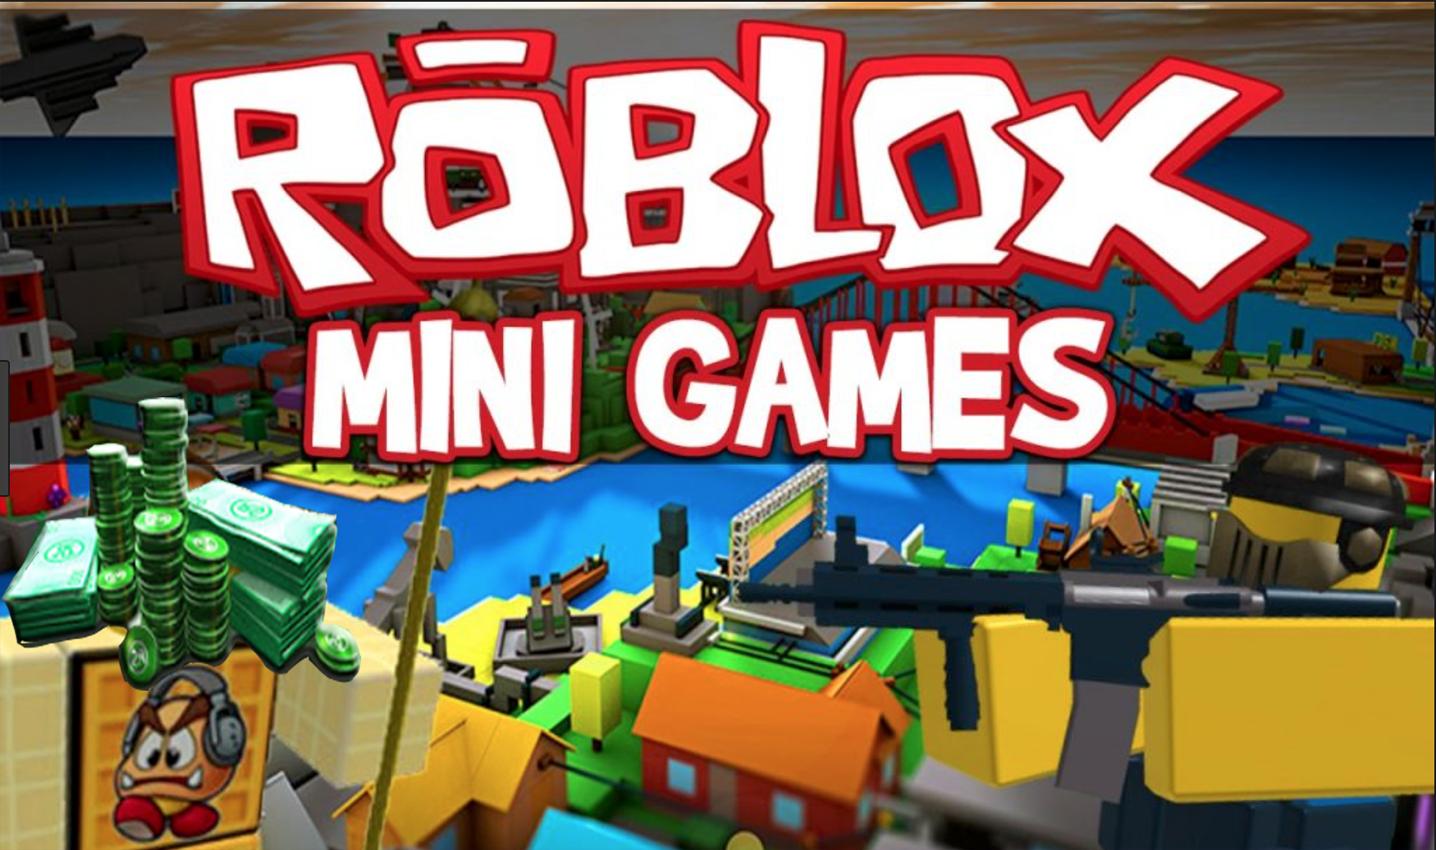 How To Get Free Robux For Roblox 2018 For Android Apk Download